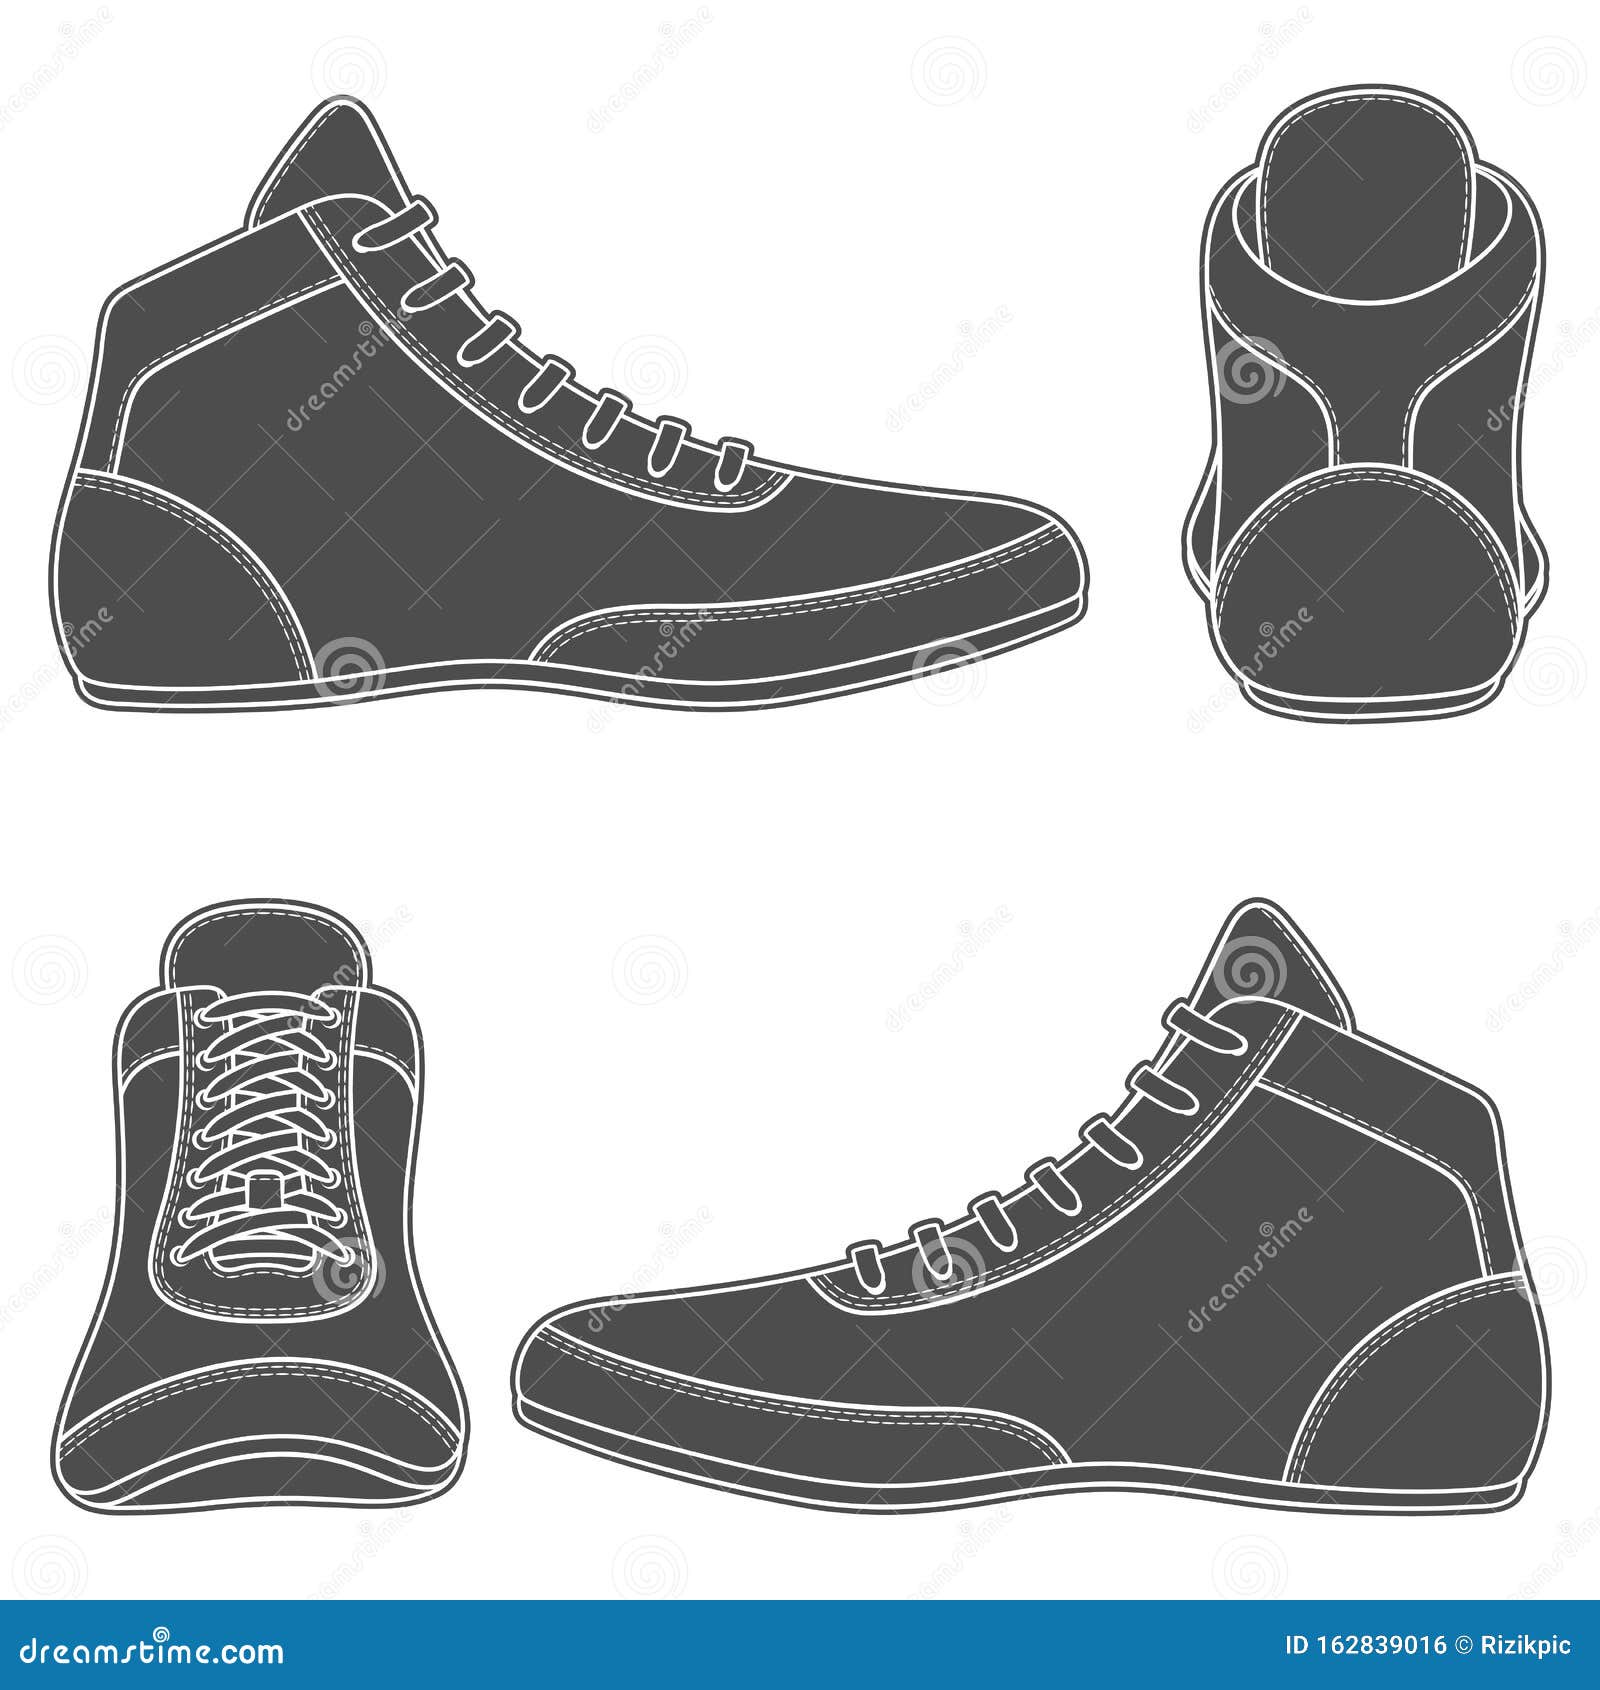 Set of Black and White Illustrations with Wrestling Shoes, Sports Shoes ...